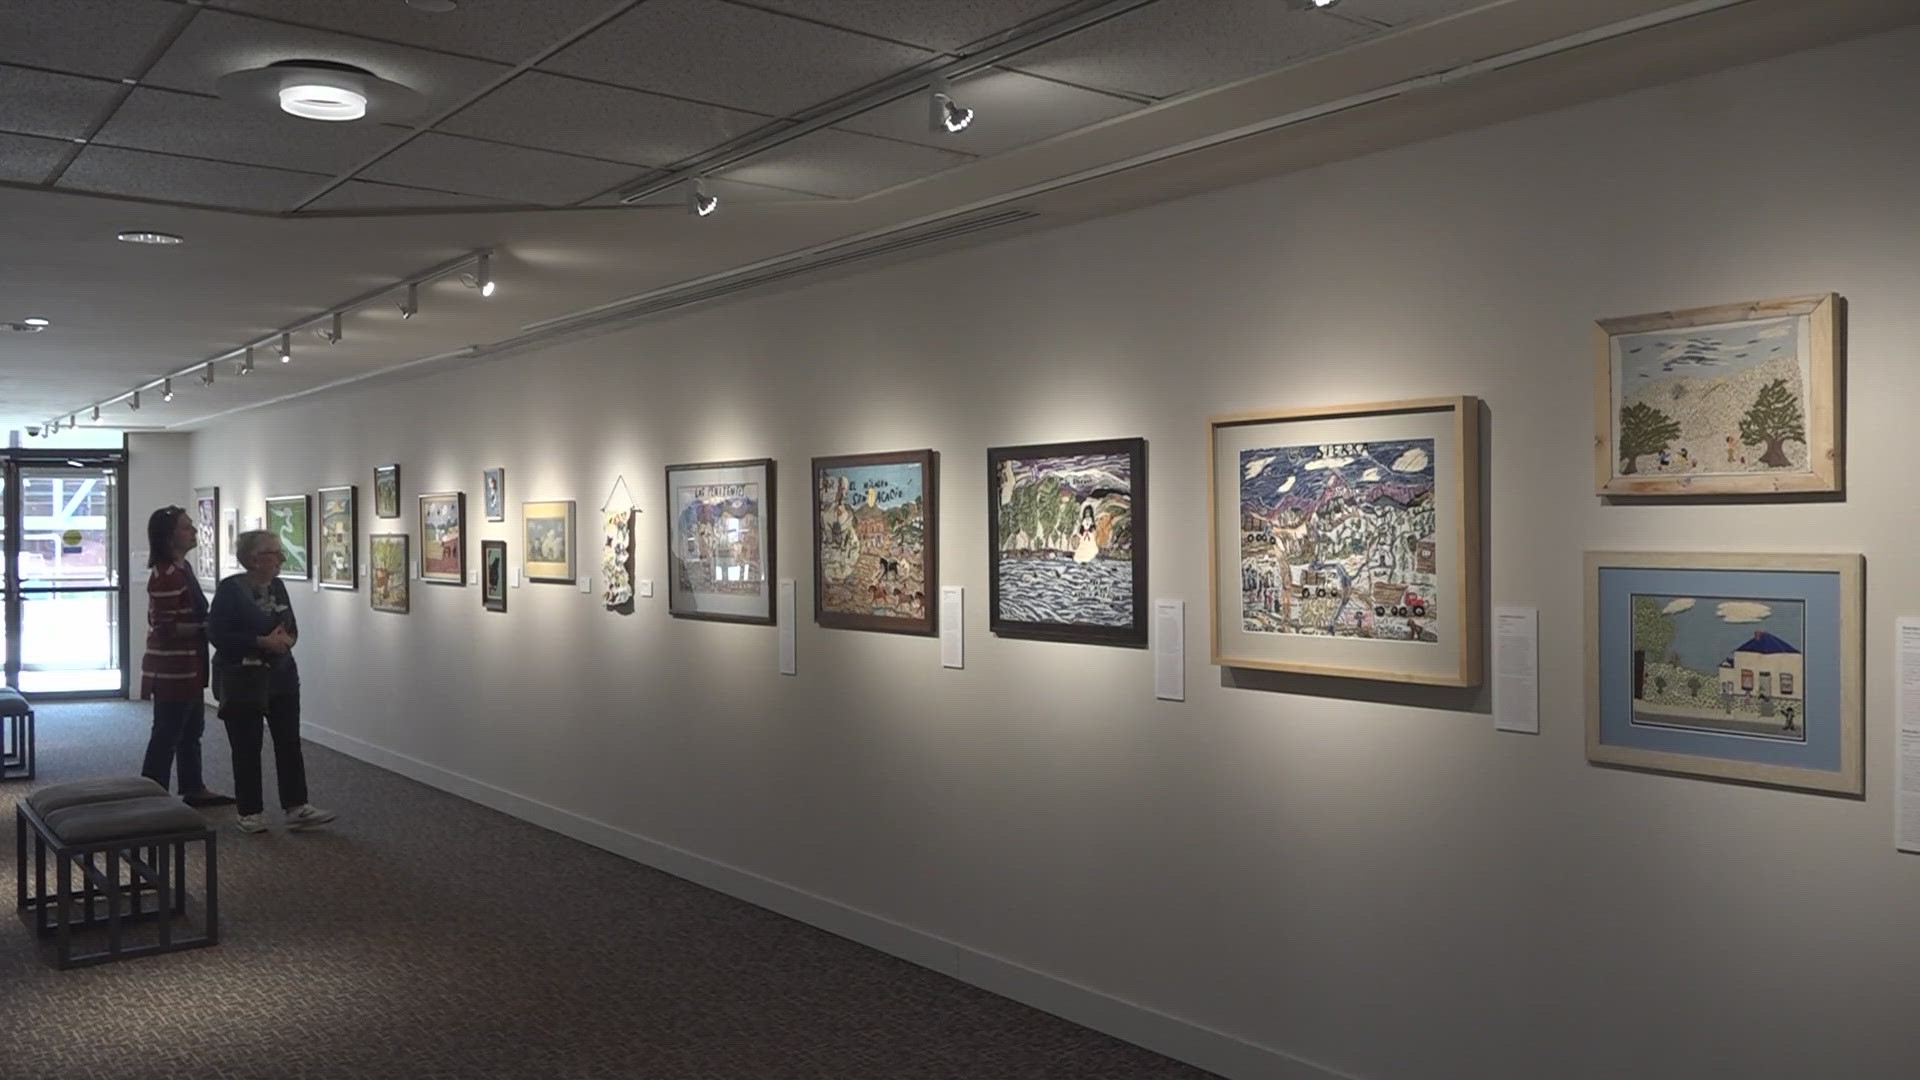 Colcha embroidery, which tells a story or depicts life in rural southern Colorado, can be viewed at the Arvada Center through mid-November.